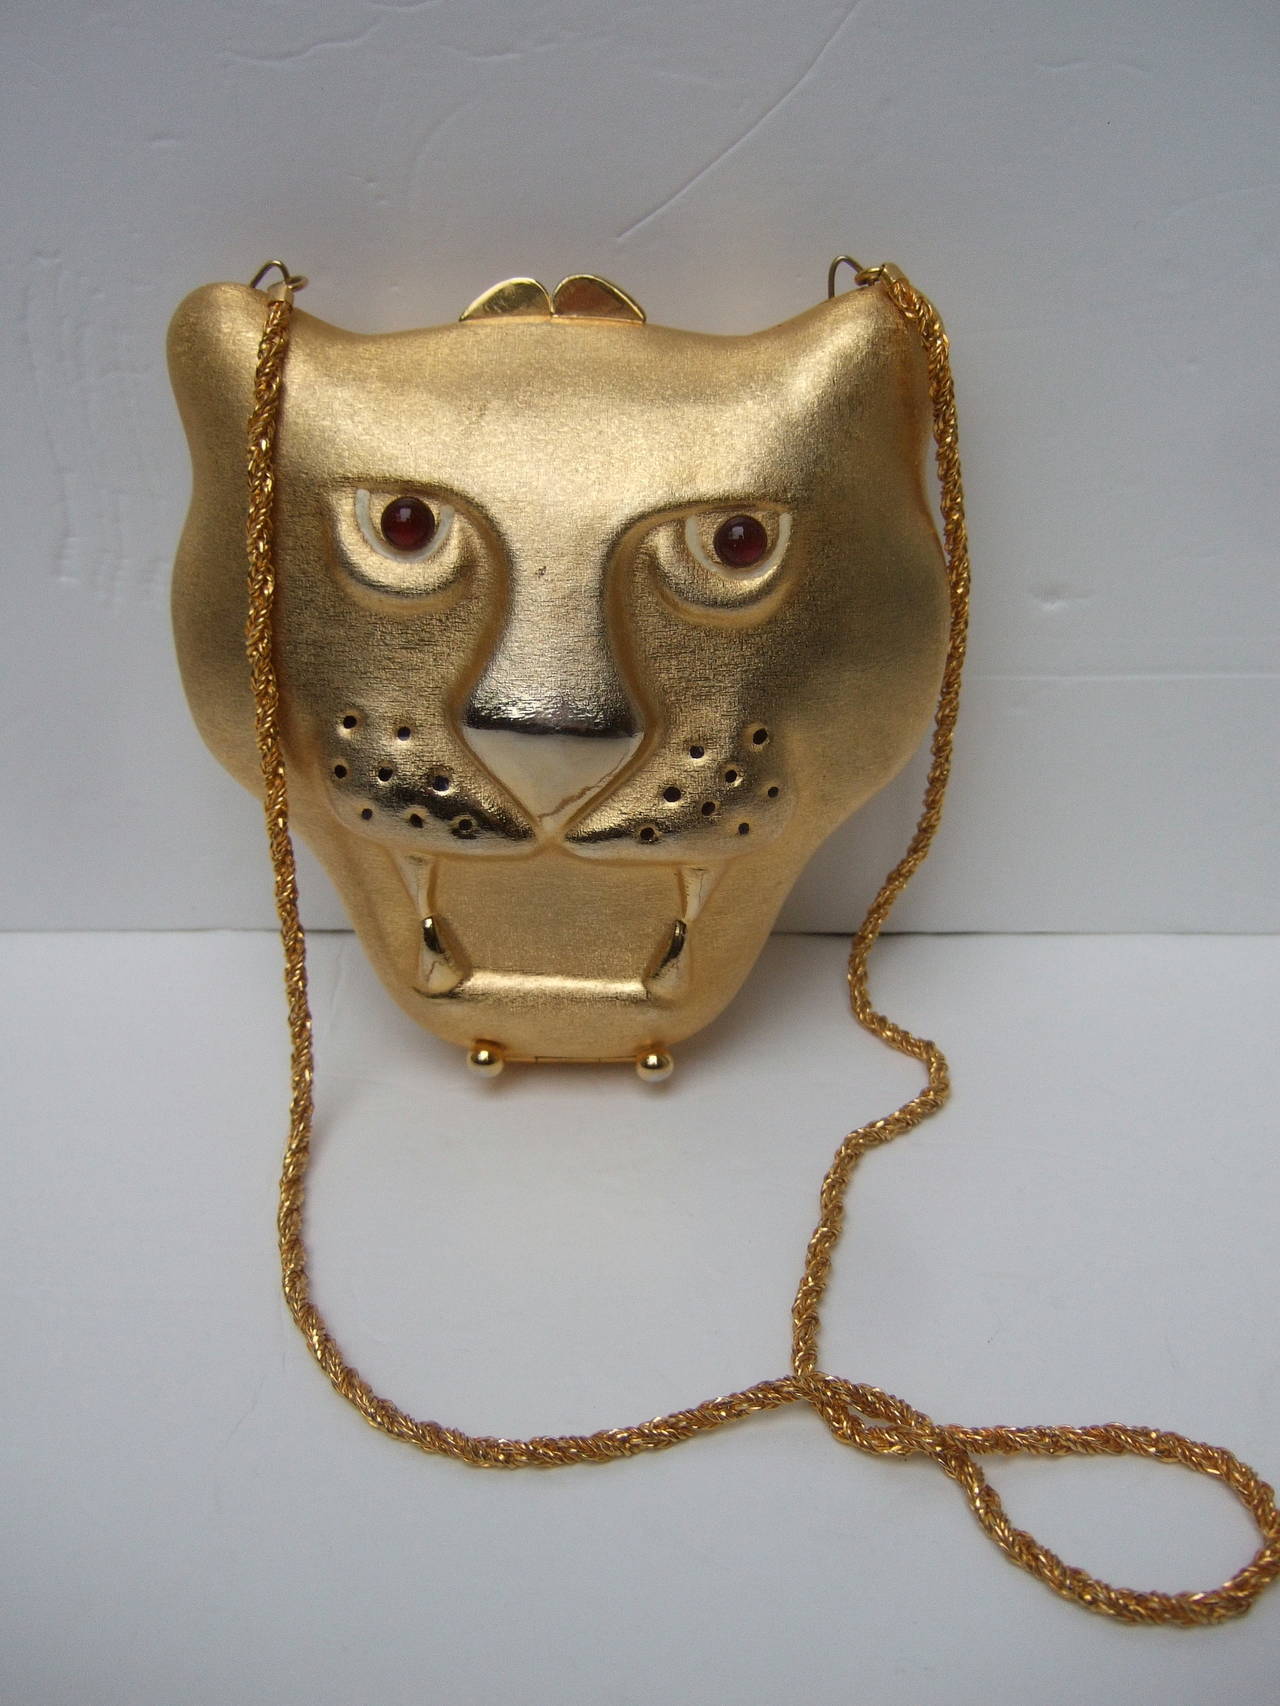 Saks Fifth Avenue Gilt Metal Panther Evening Bag Made in Italy c 1970s In Good Condition For Sale In University City, MO